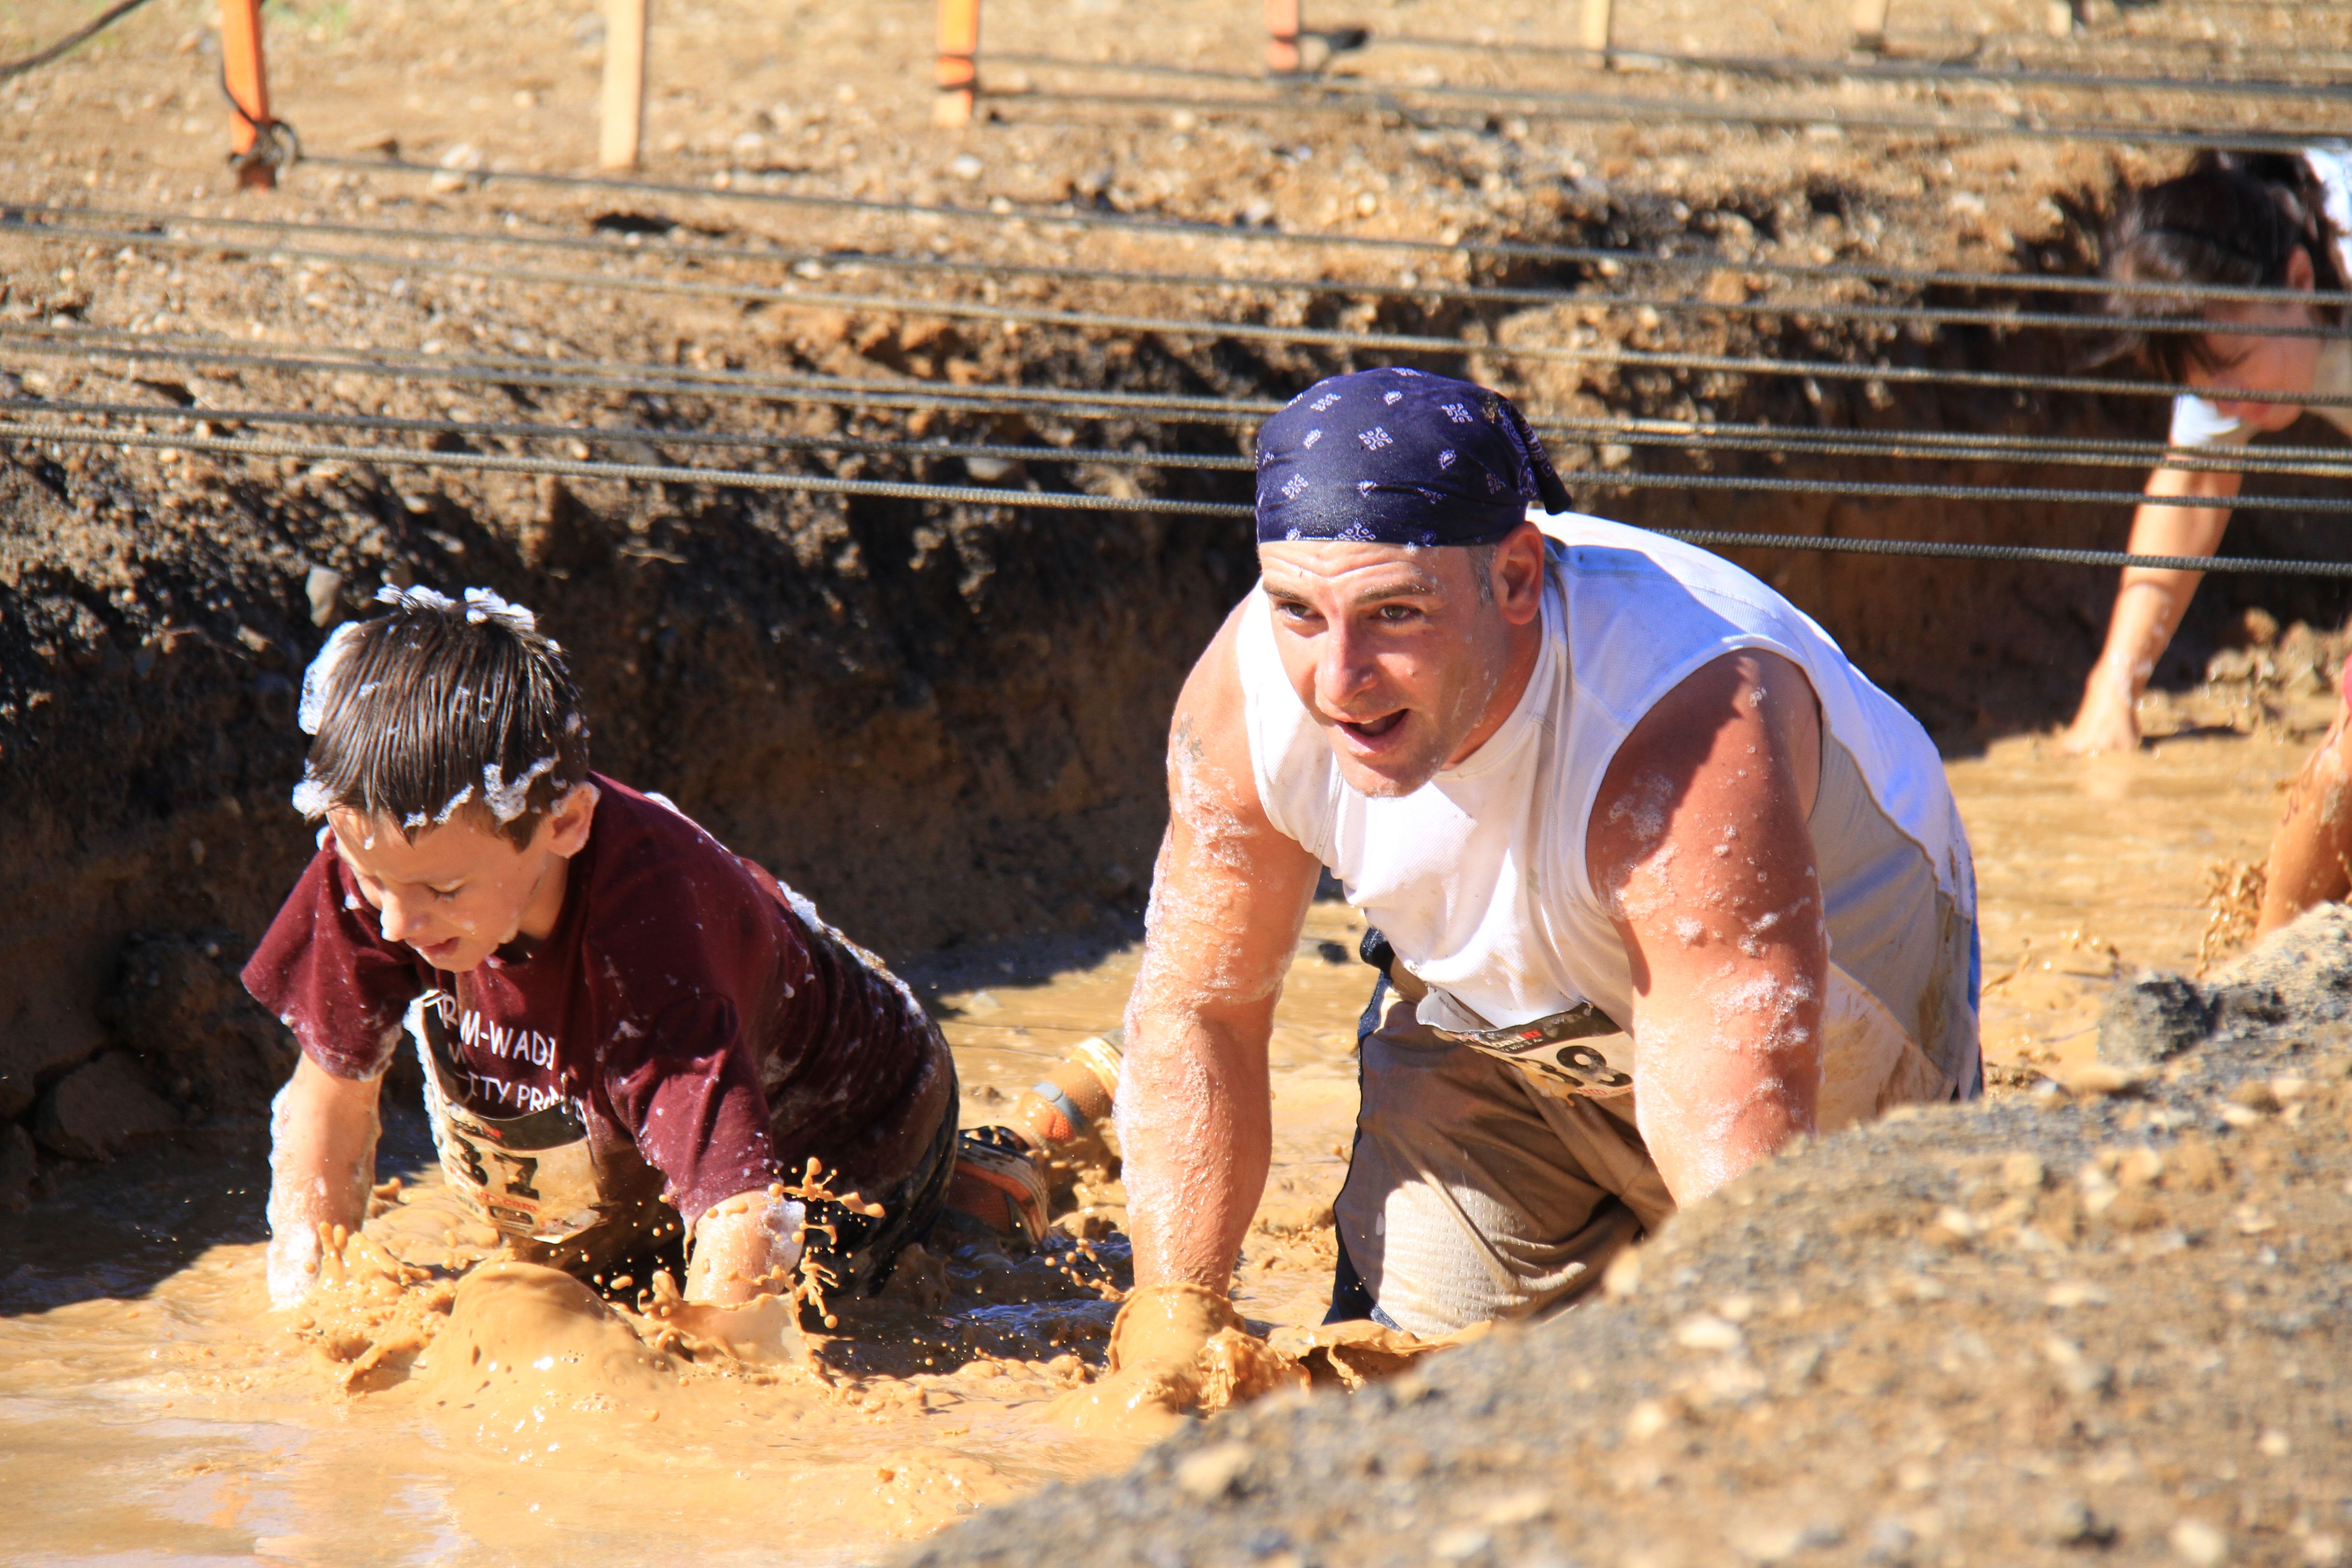 Long Island Adventure Race September 19, 2015 5k Obstacle Course Mud